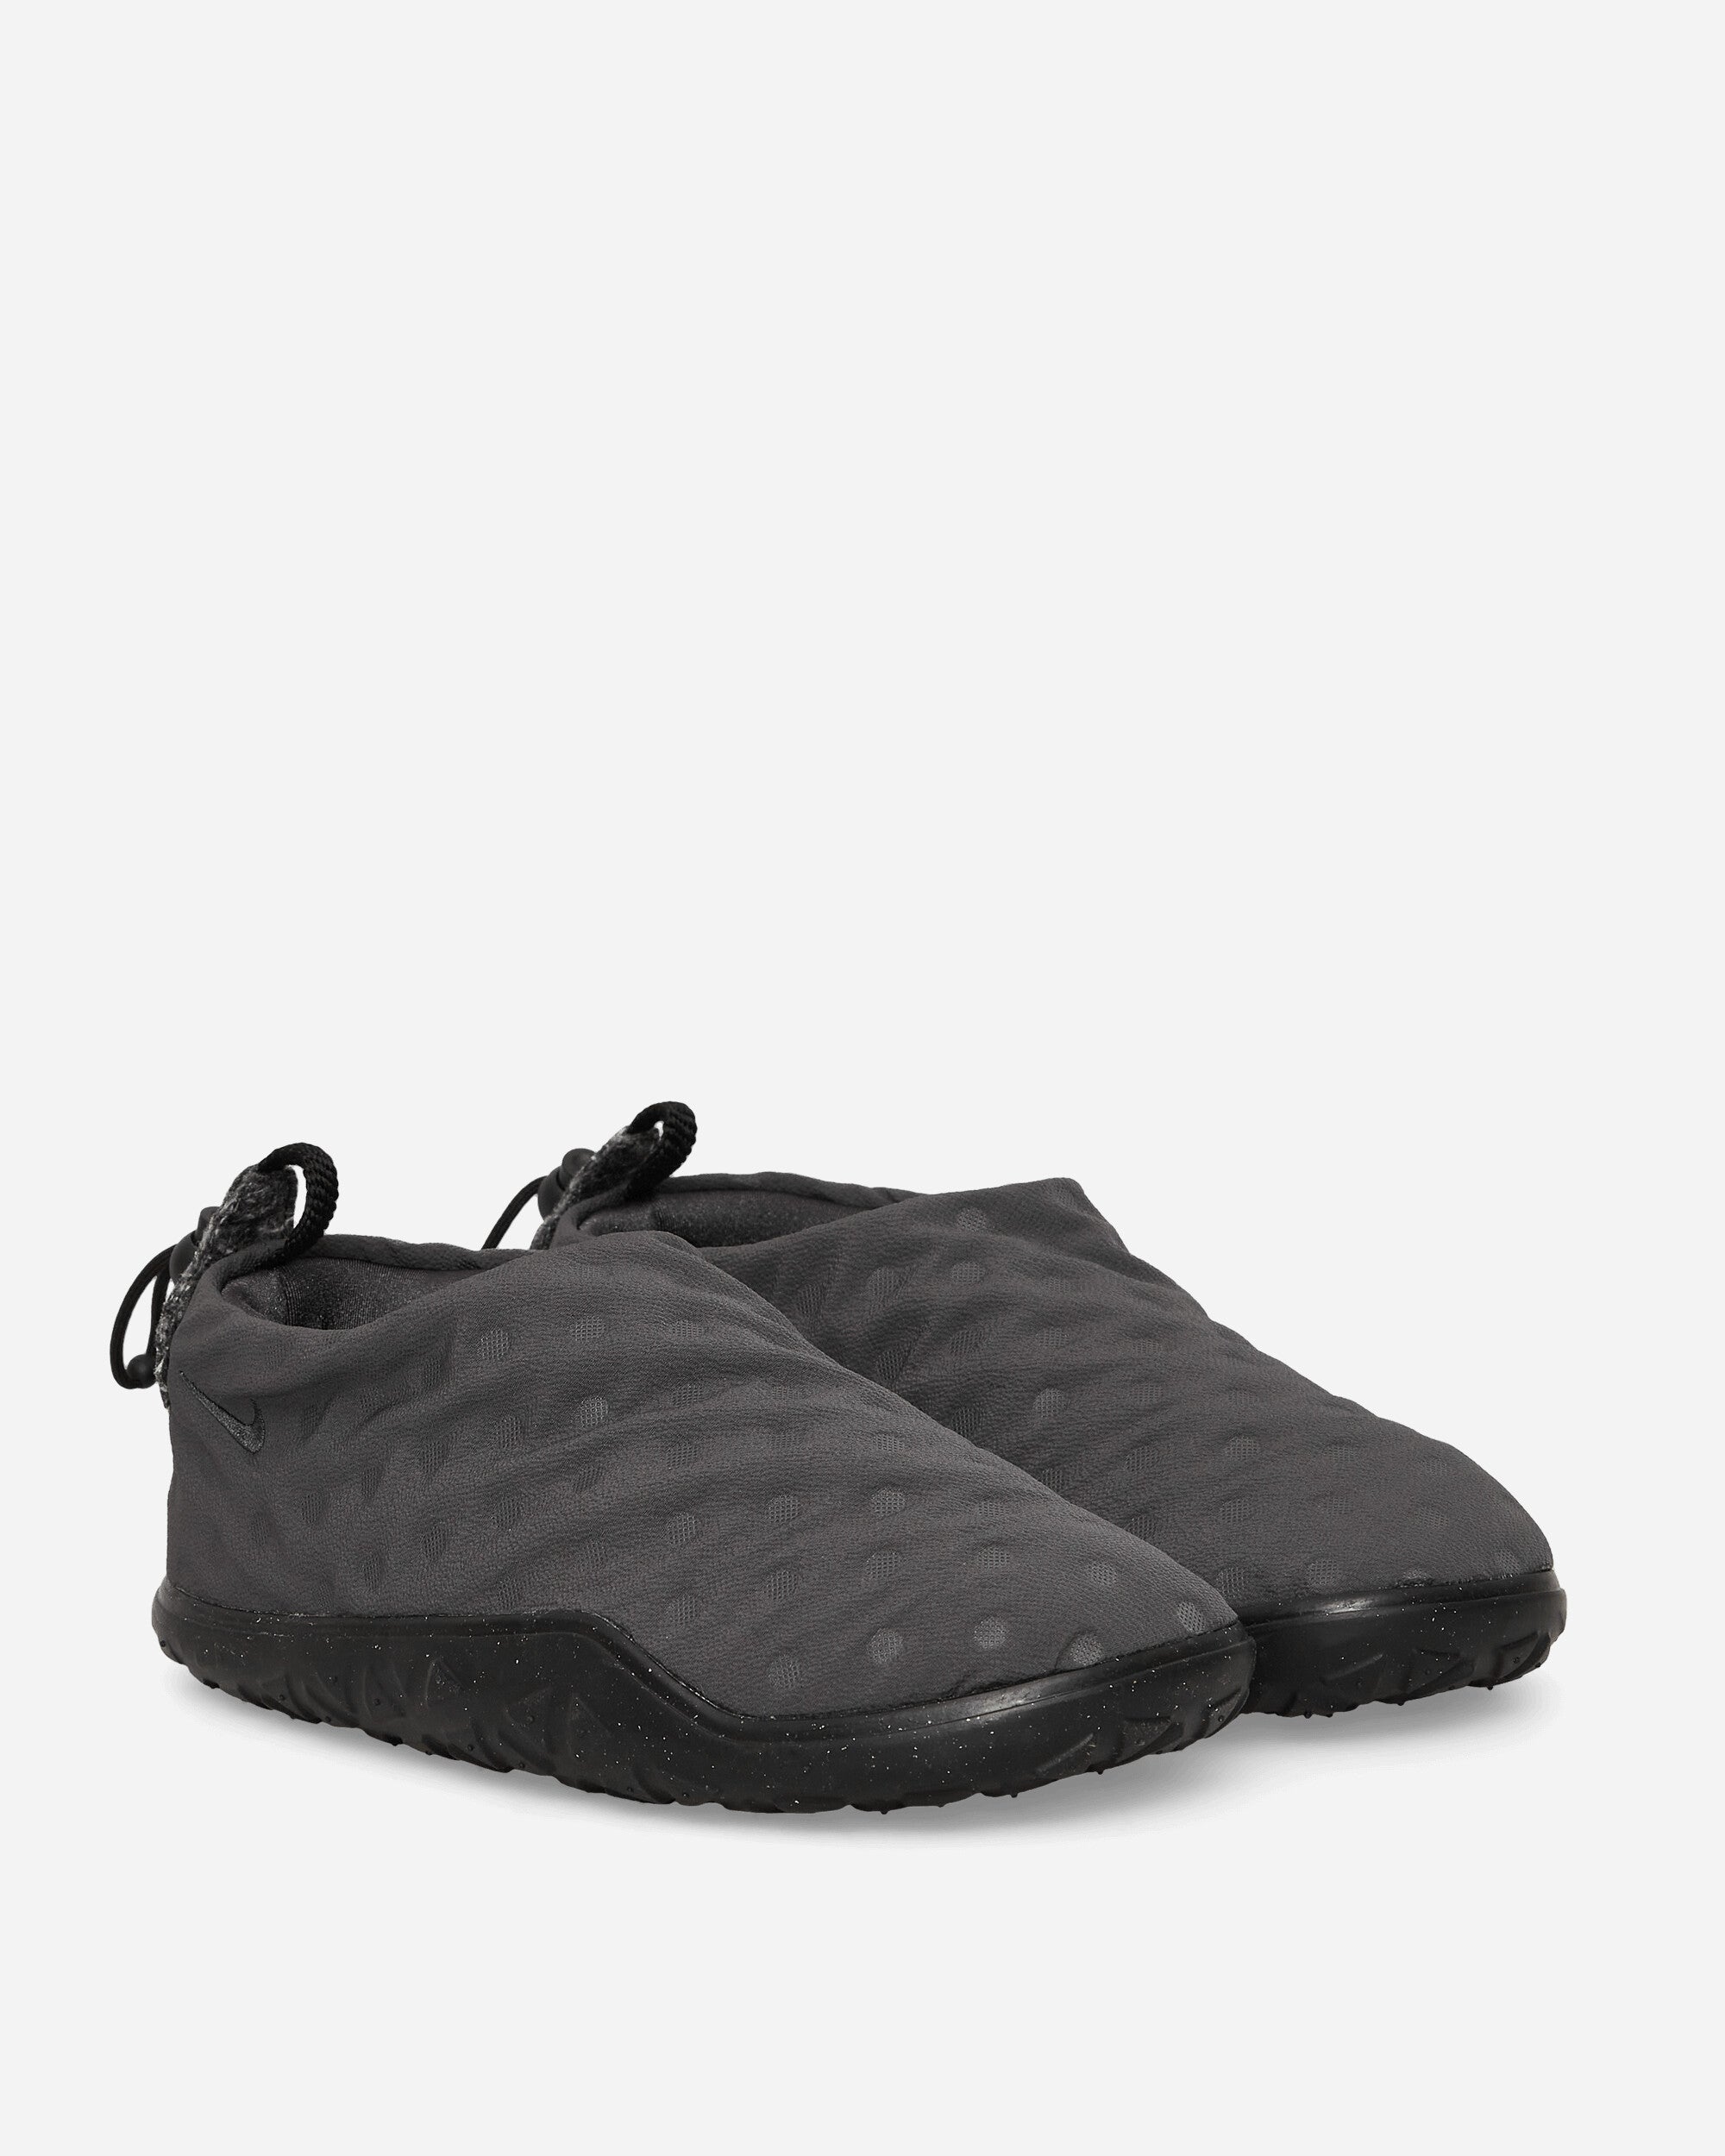 Nike Acg Moc Anthracite/Black Sneakers Low DQ6453-001